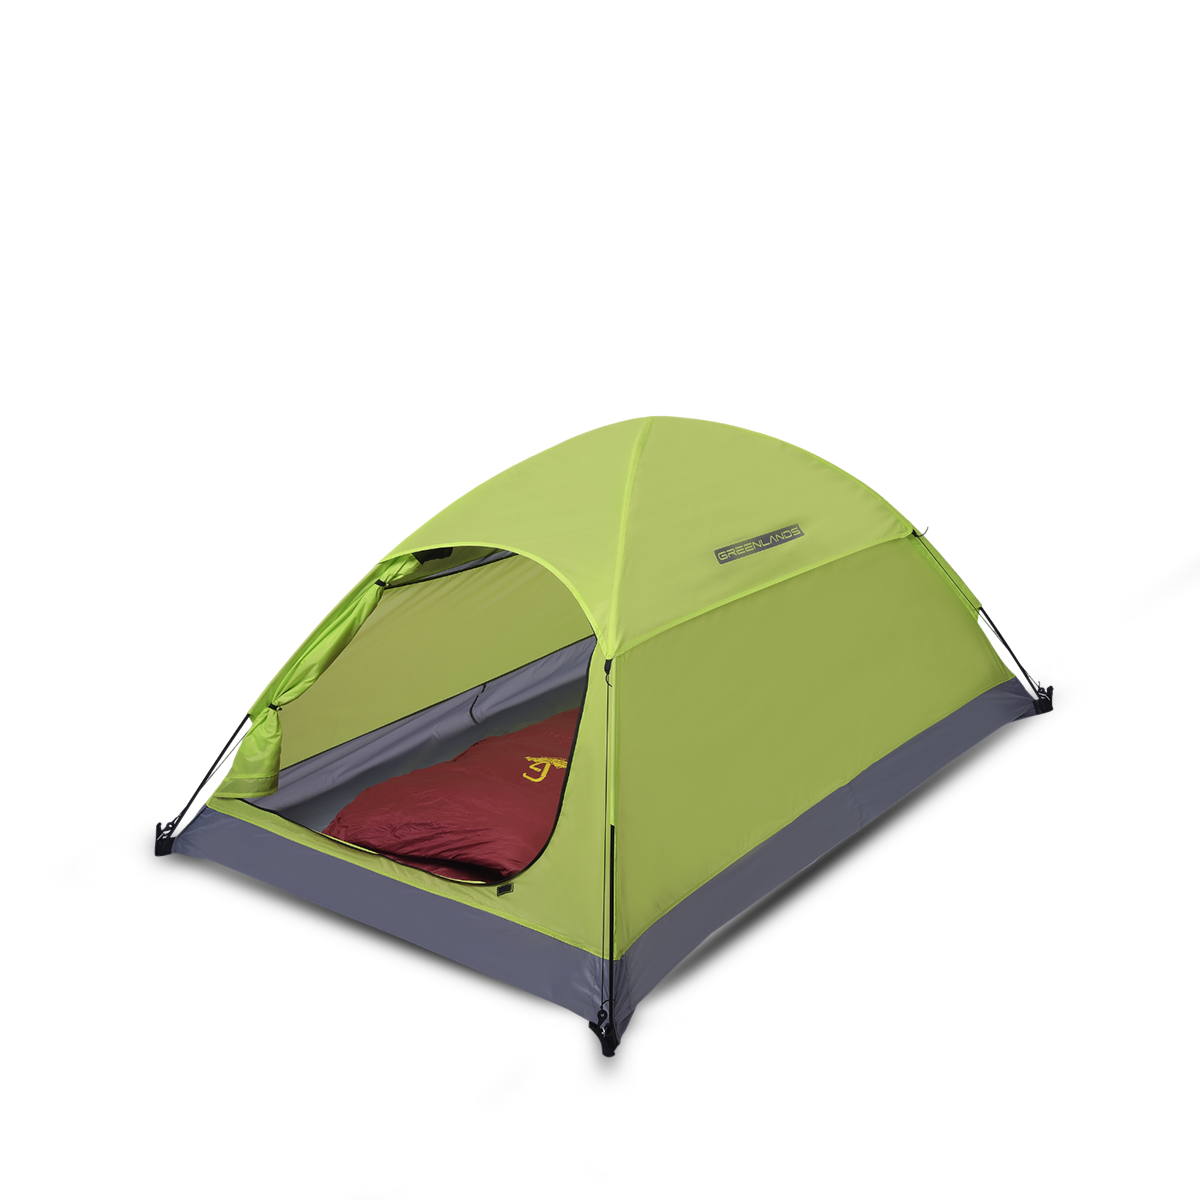 UNO 2P Camping Tent for Intimate Adventures in Nature